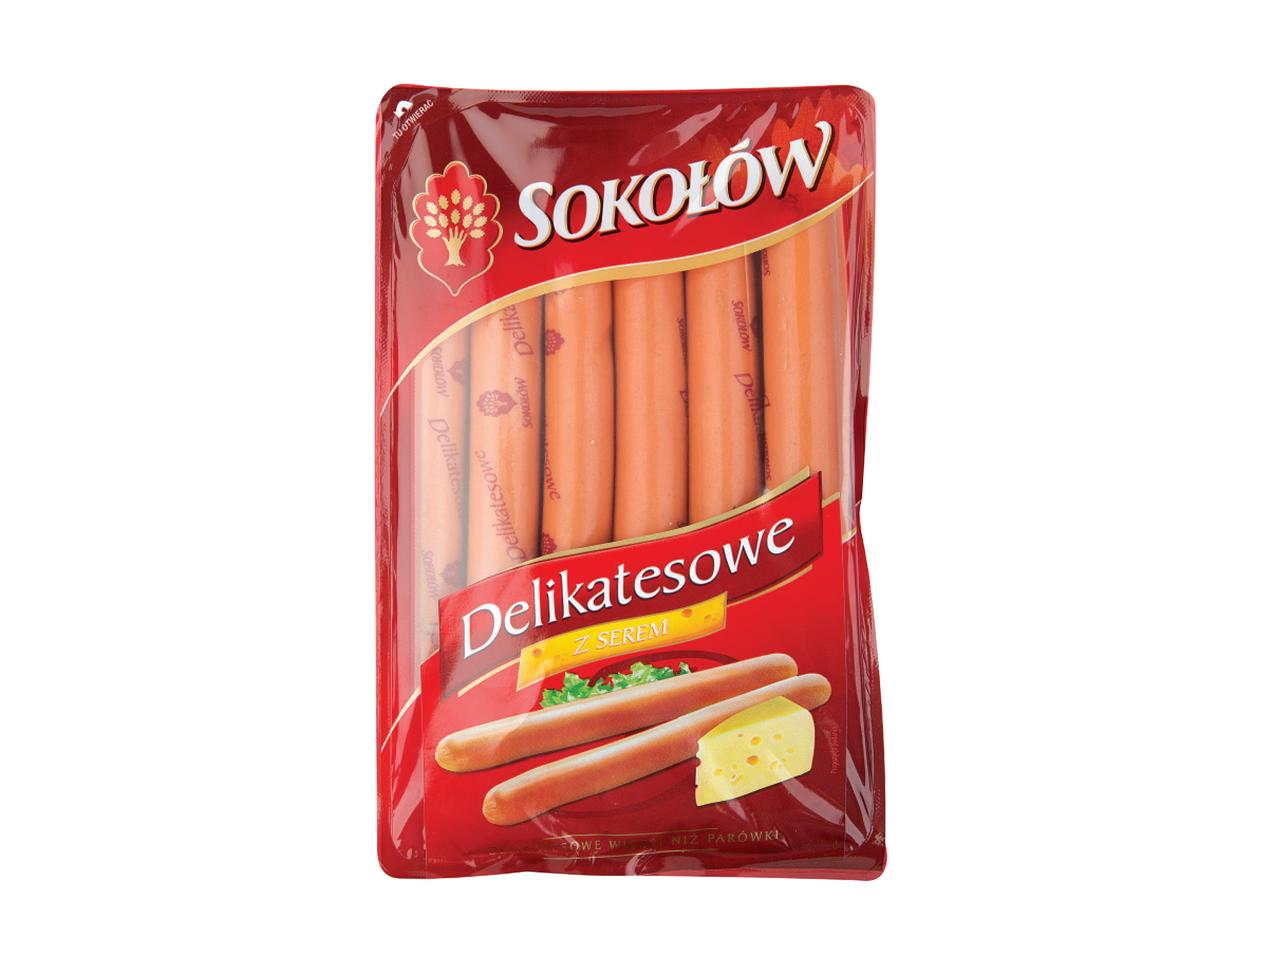 Sokolow Deluxe Pork Frankfurters with Cheese